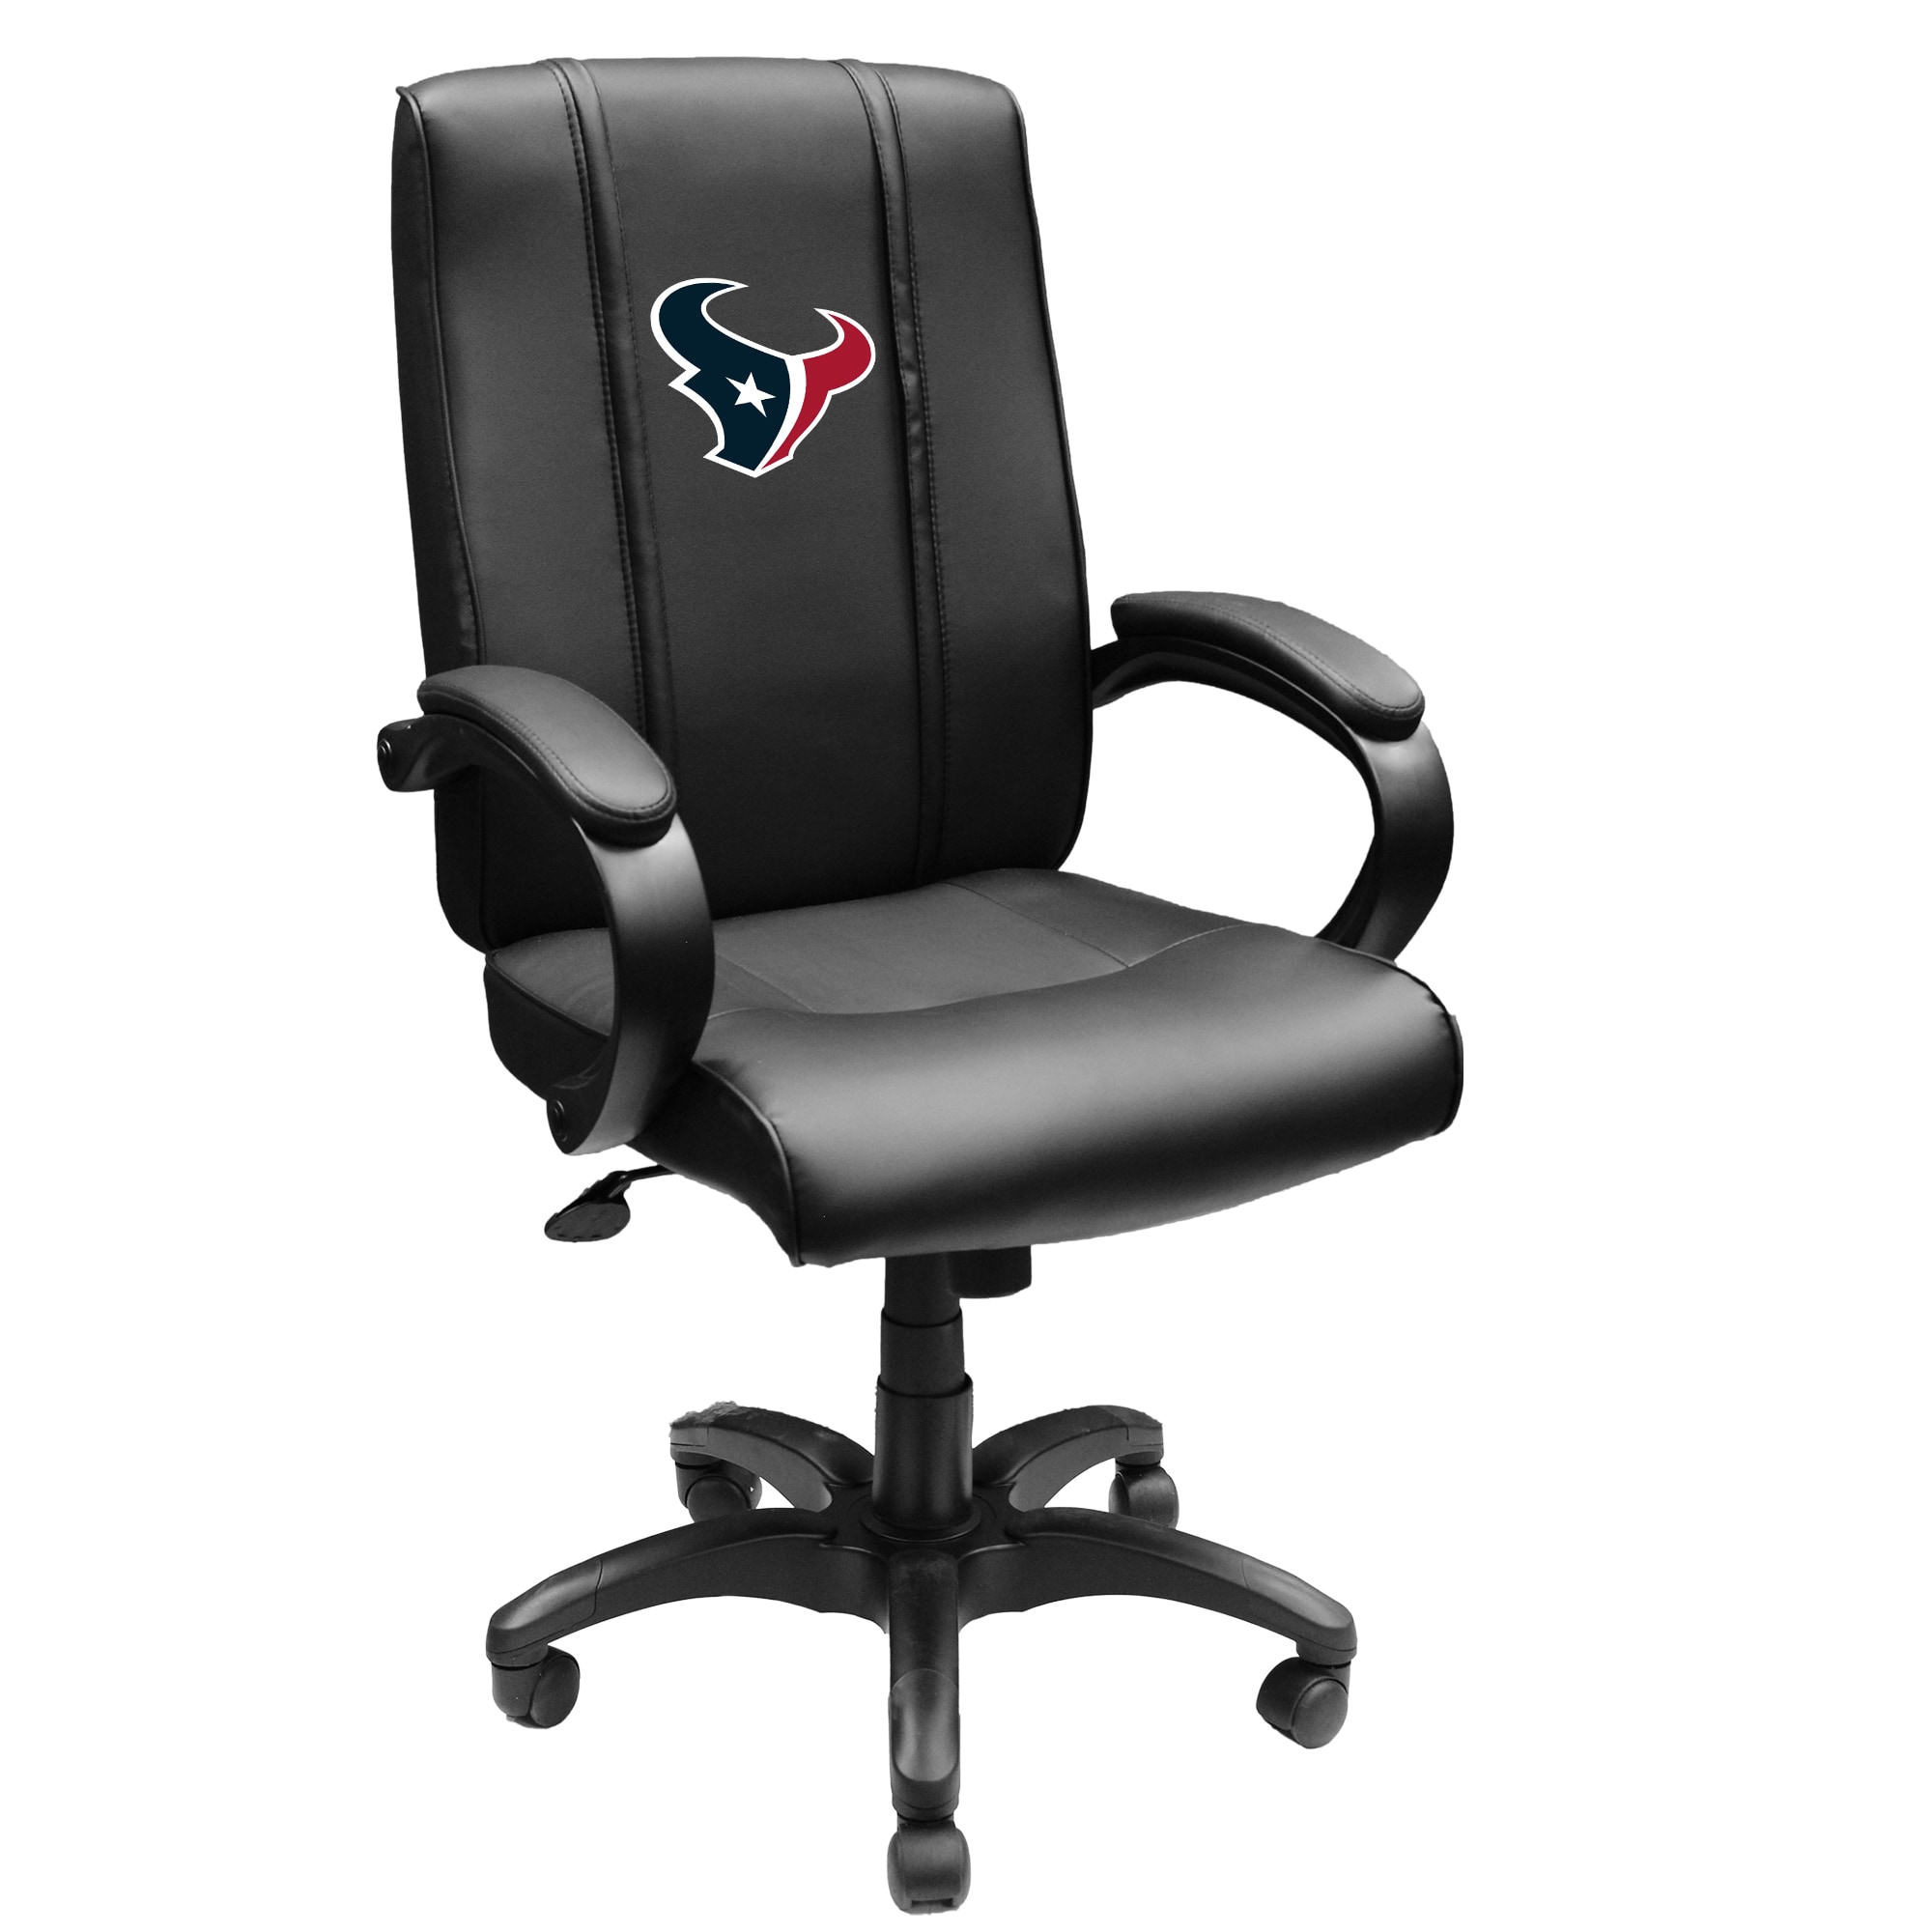 Houston Texans Office Chair 1000 - image 1 of 4